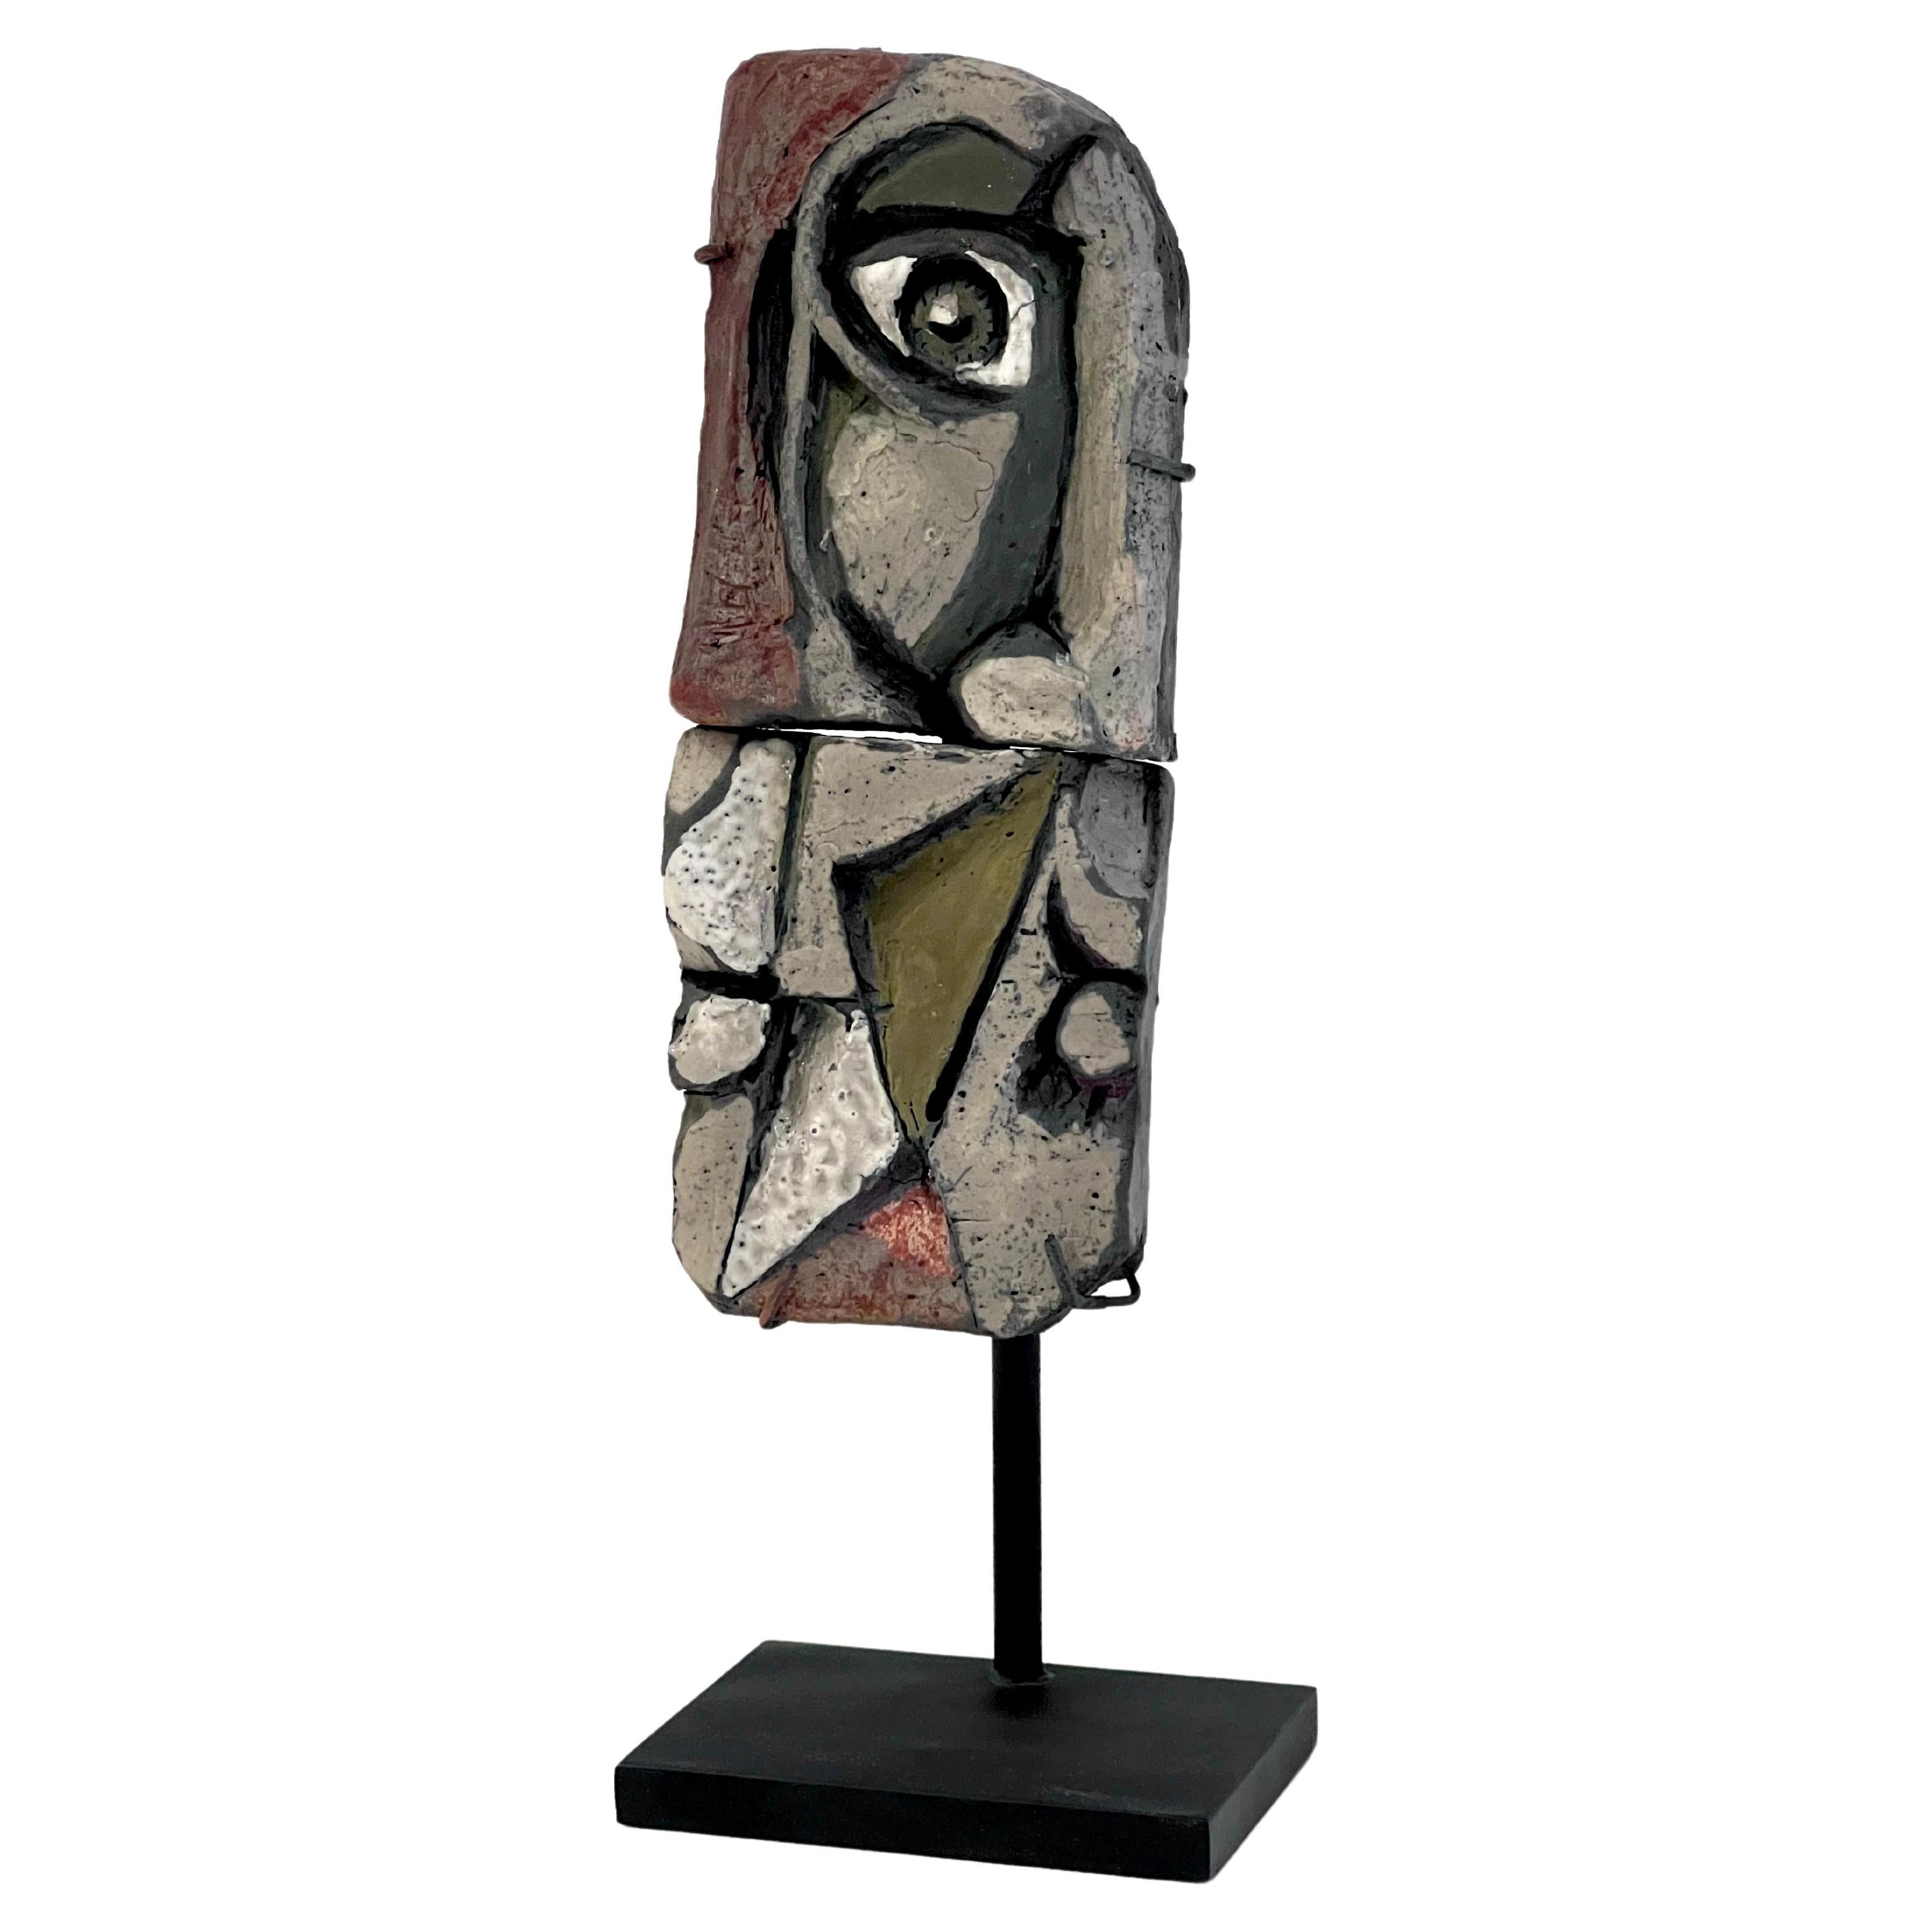 Roger Capron Abstract Ceramic Sculpture on Stand